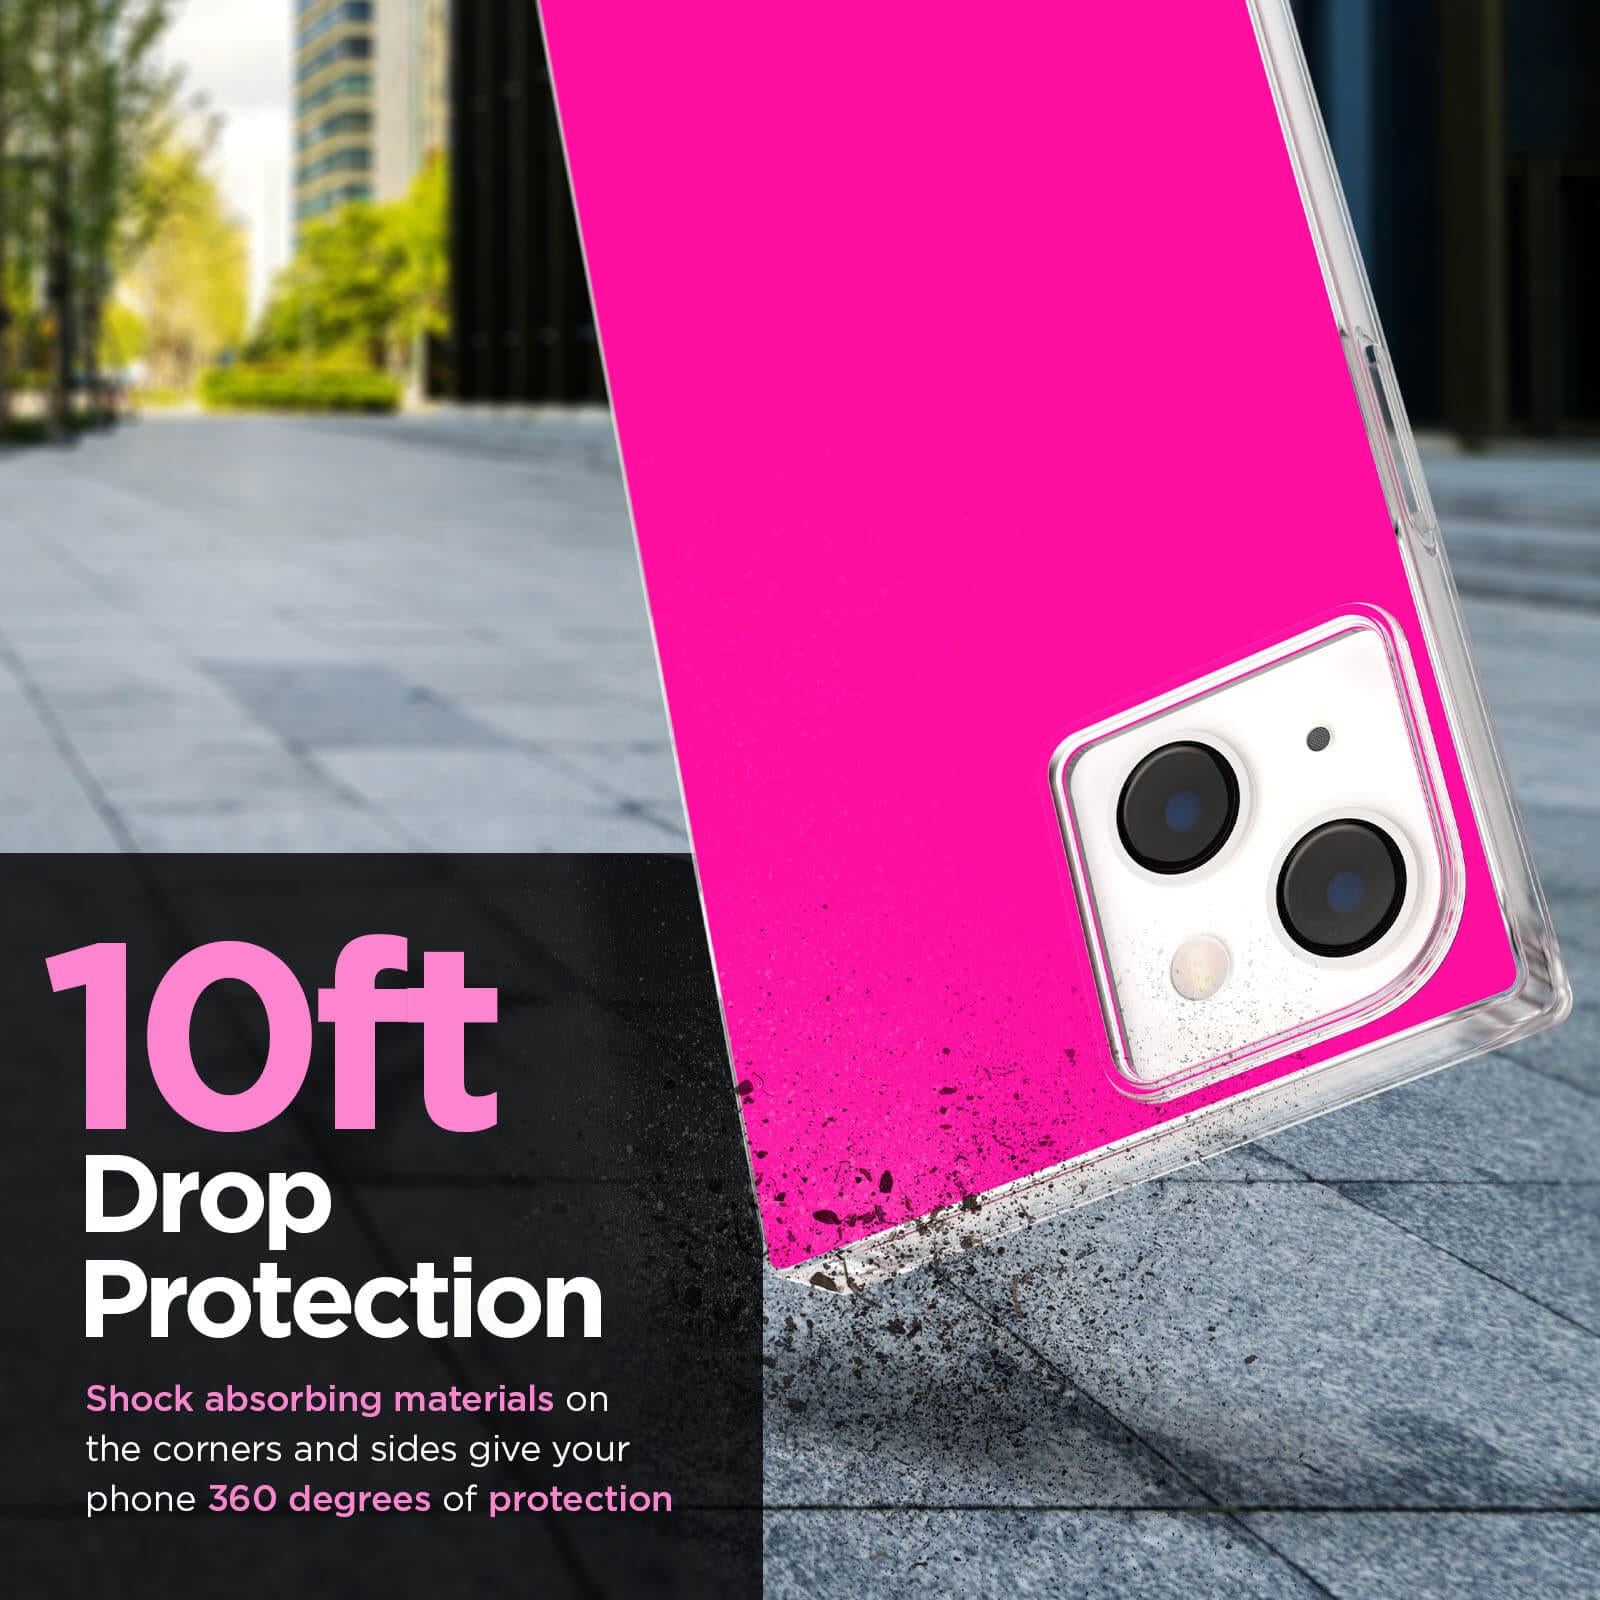 10ft drop protection. Shock absorbing materials on the corners and sides give your phone 360 degrees of protection. color::Hot Pink